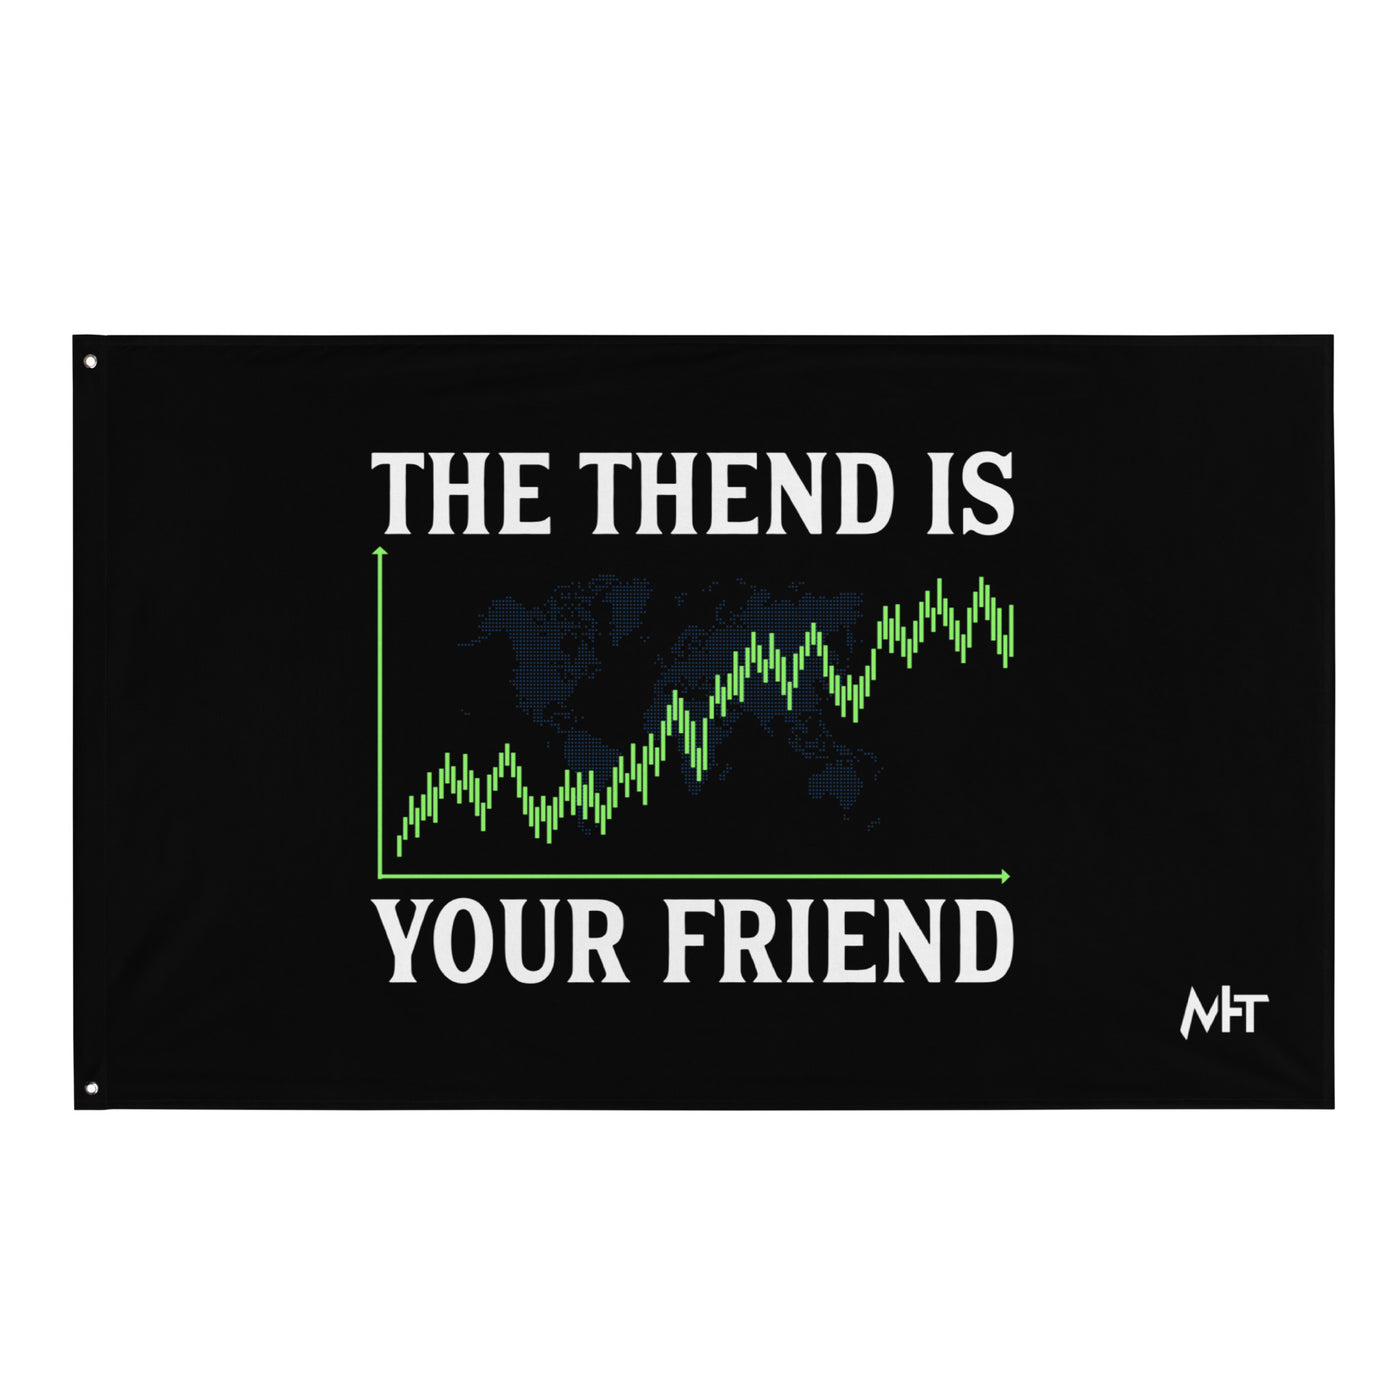 The Trend is your friend - Flag